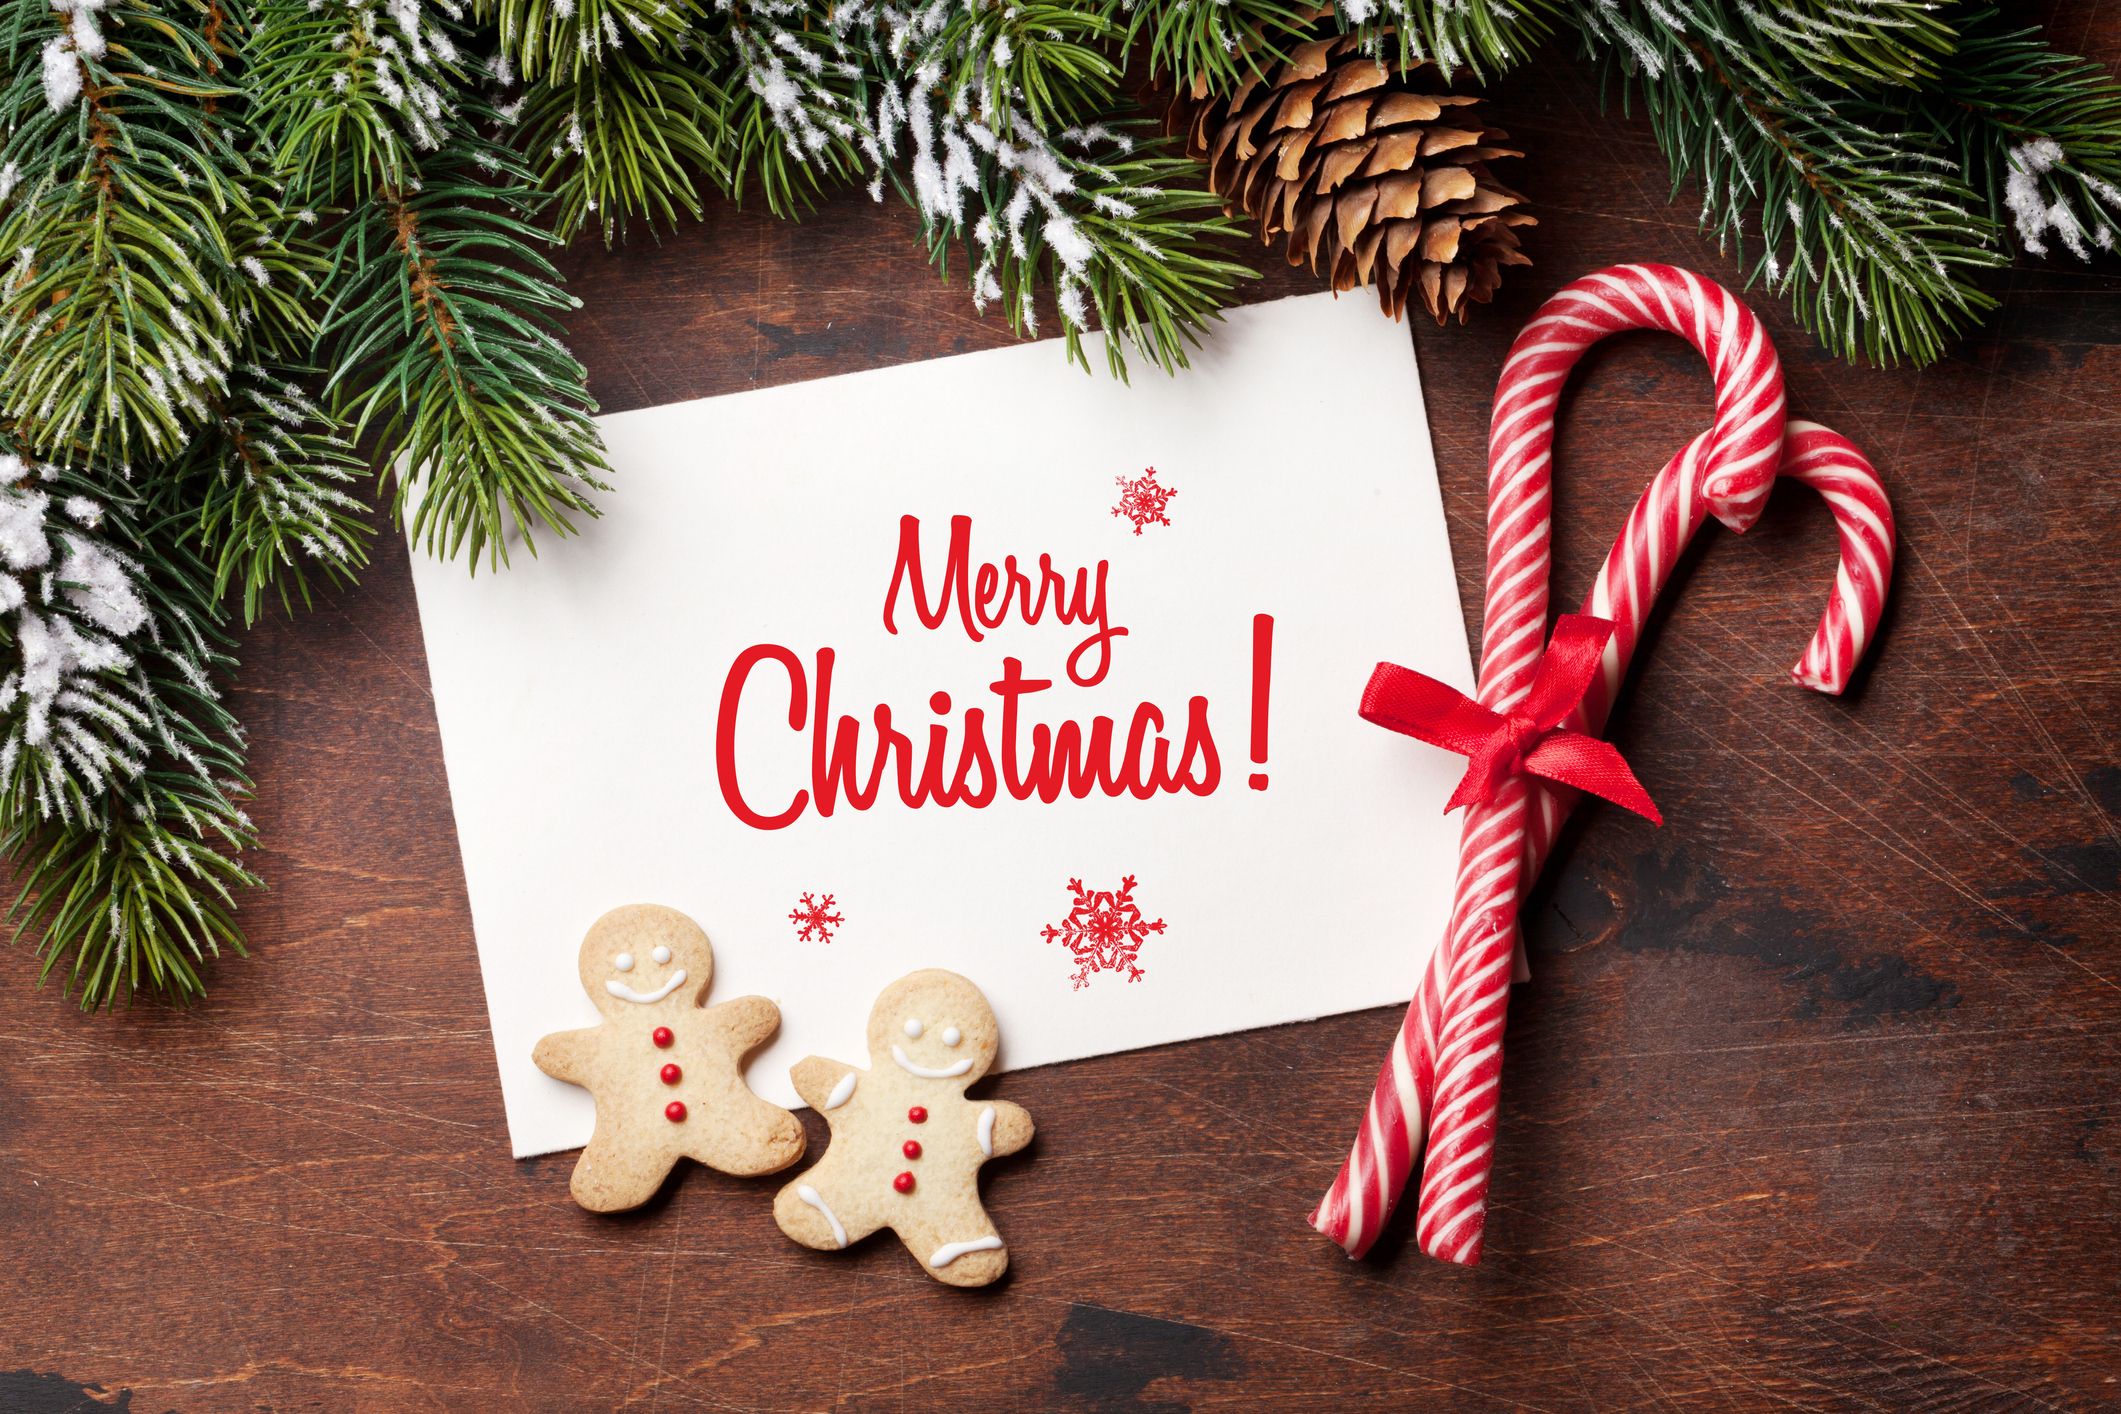 50 Best Christmas Greetings and Wishes 2021 - What to Write in a Christmas  Card